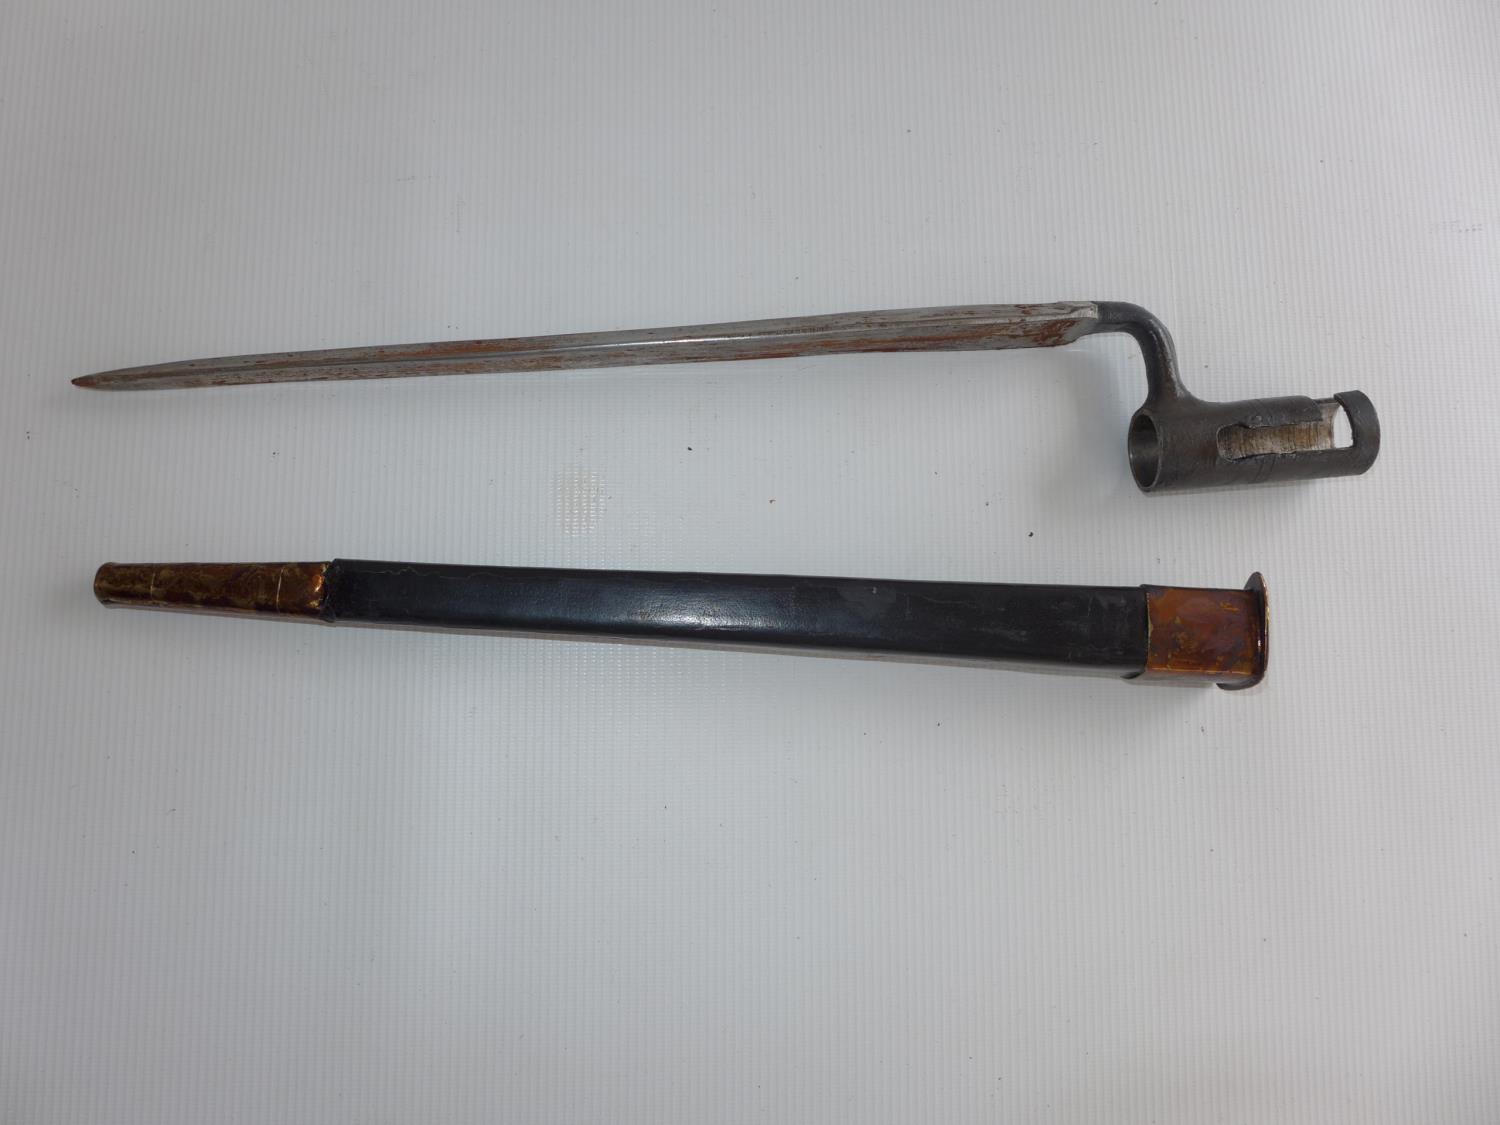 AN EAST INDIA COMPANY PERCUSSION CAP BROWN BESS MUSKET AND BAYONET, LOCK MARKED HURST, LENGTH OF - Image 11 of 11